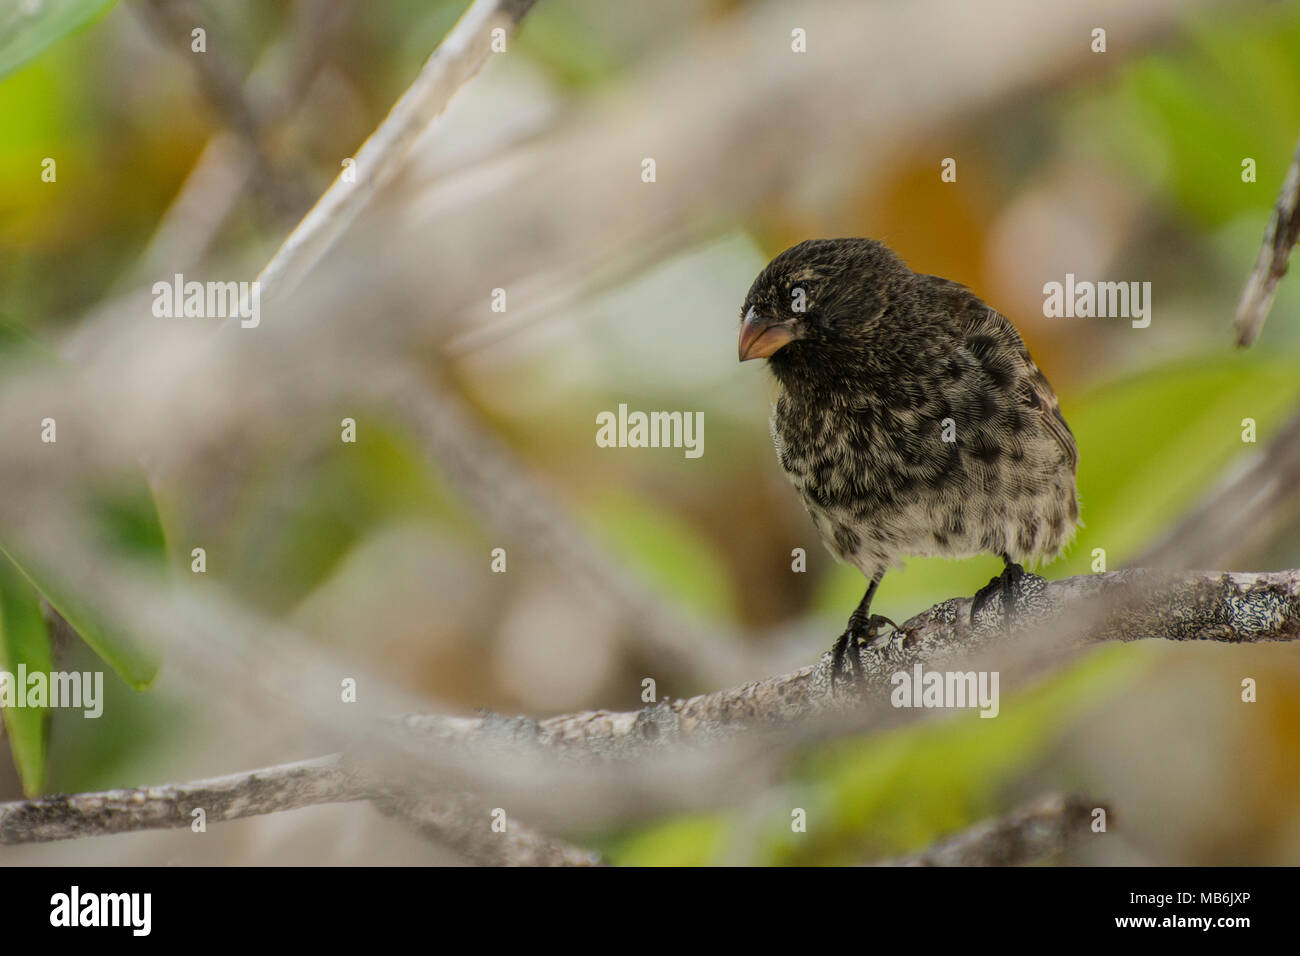 A small ground finch (Geospiza fuliginosa) a species endemic to the galapagos islands and famous as one of the bird species Darwin studied. Stock Photo